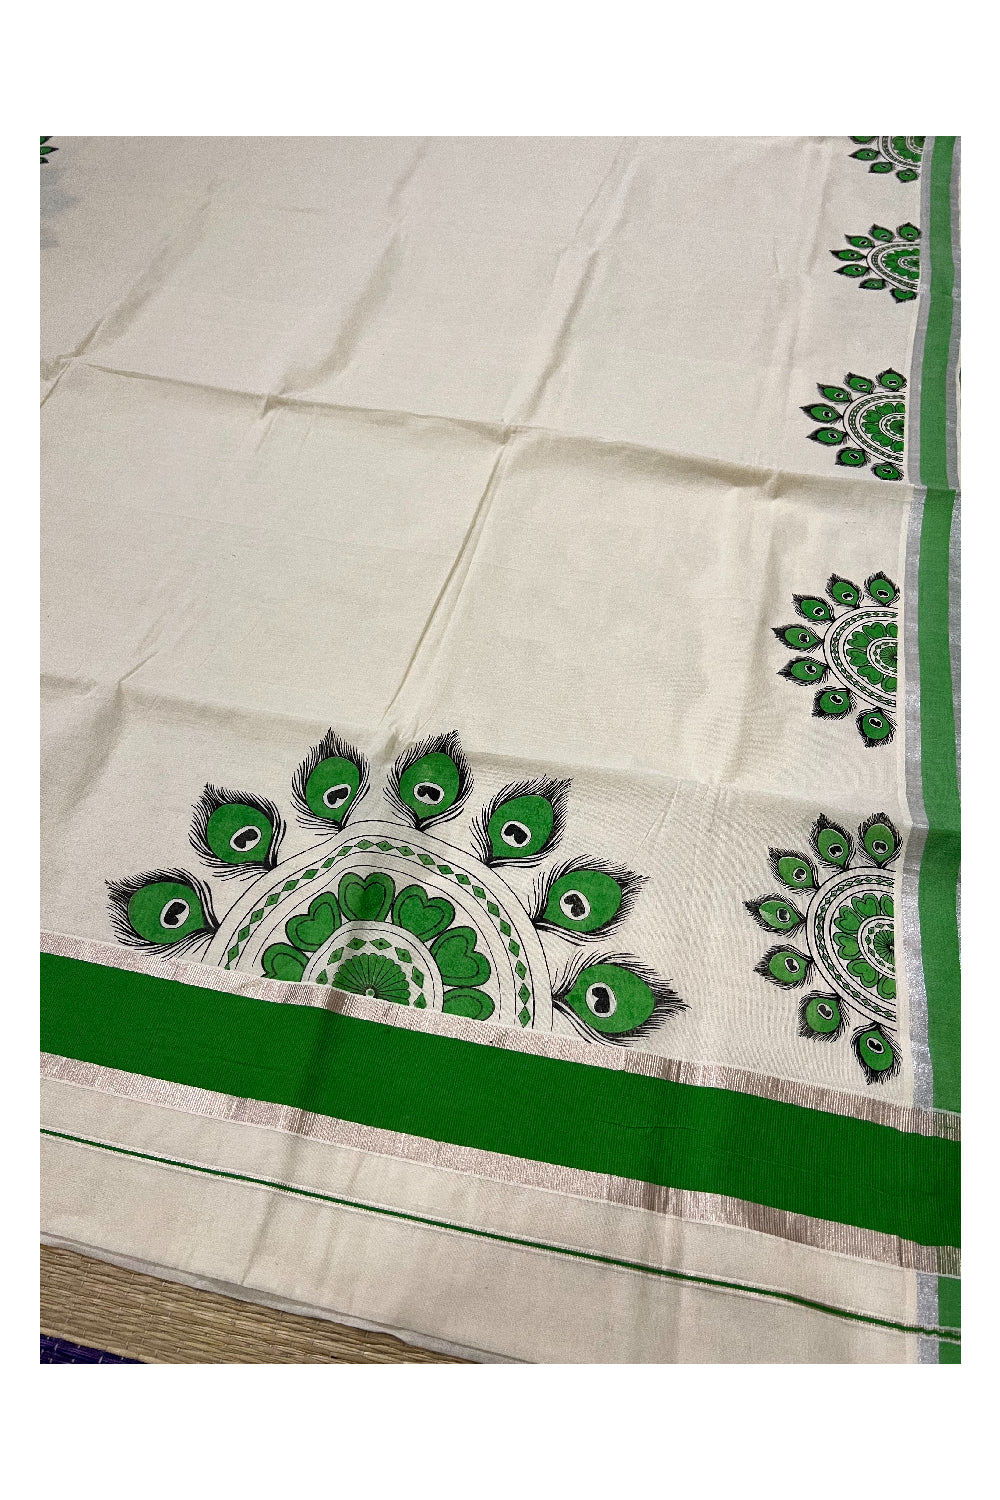 Pure Cotton Kerala Saree with Mural Printed Light Green Feather Semi Circle in Light Green and Silver Kasavu Border